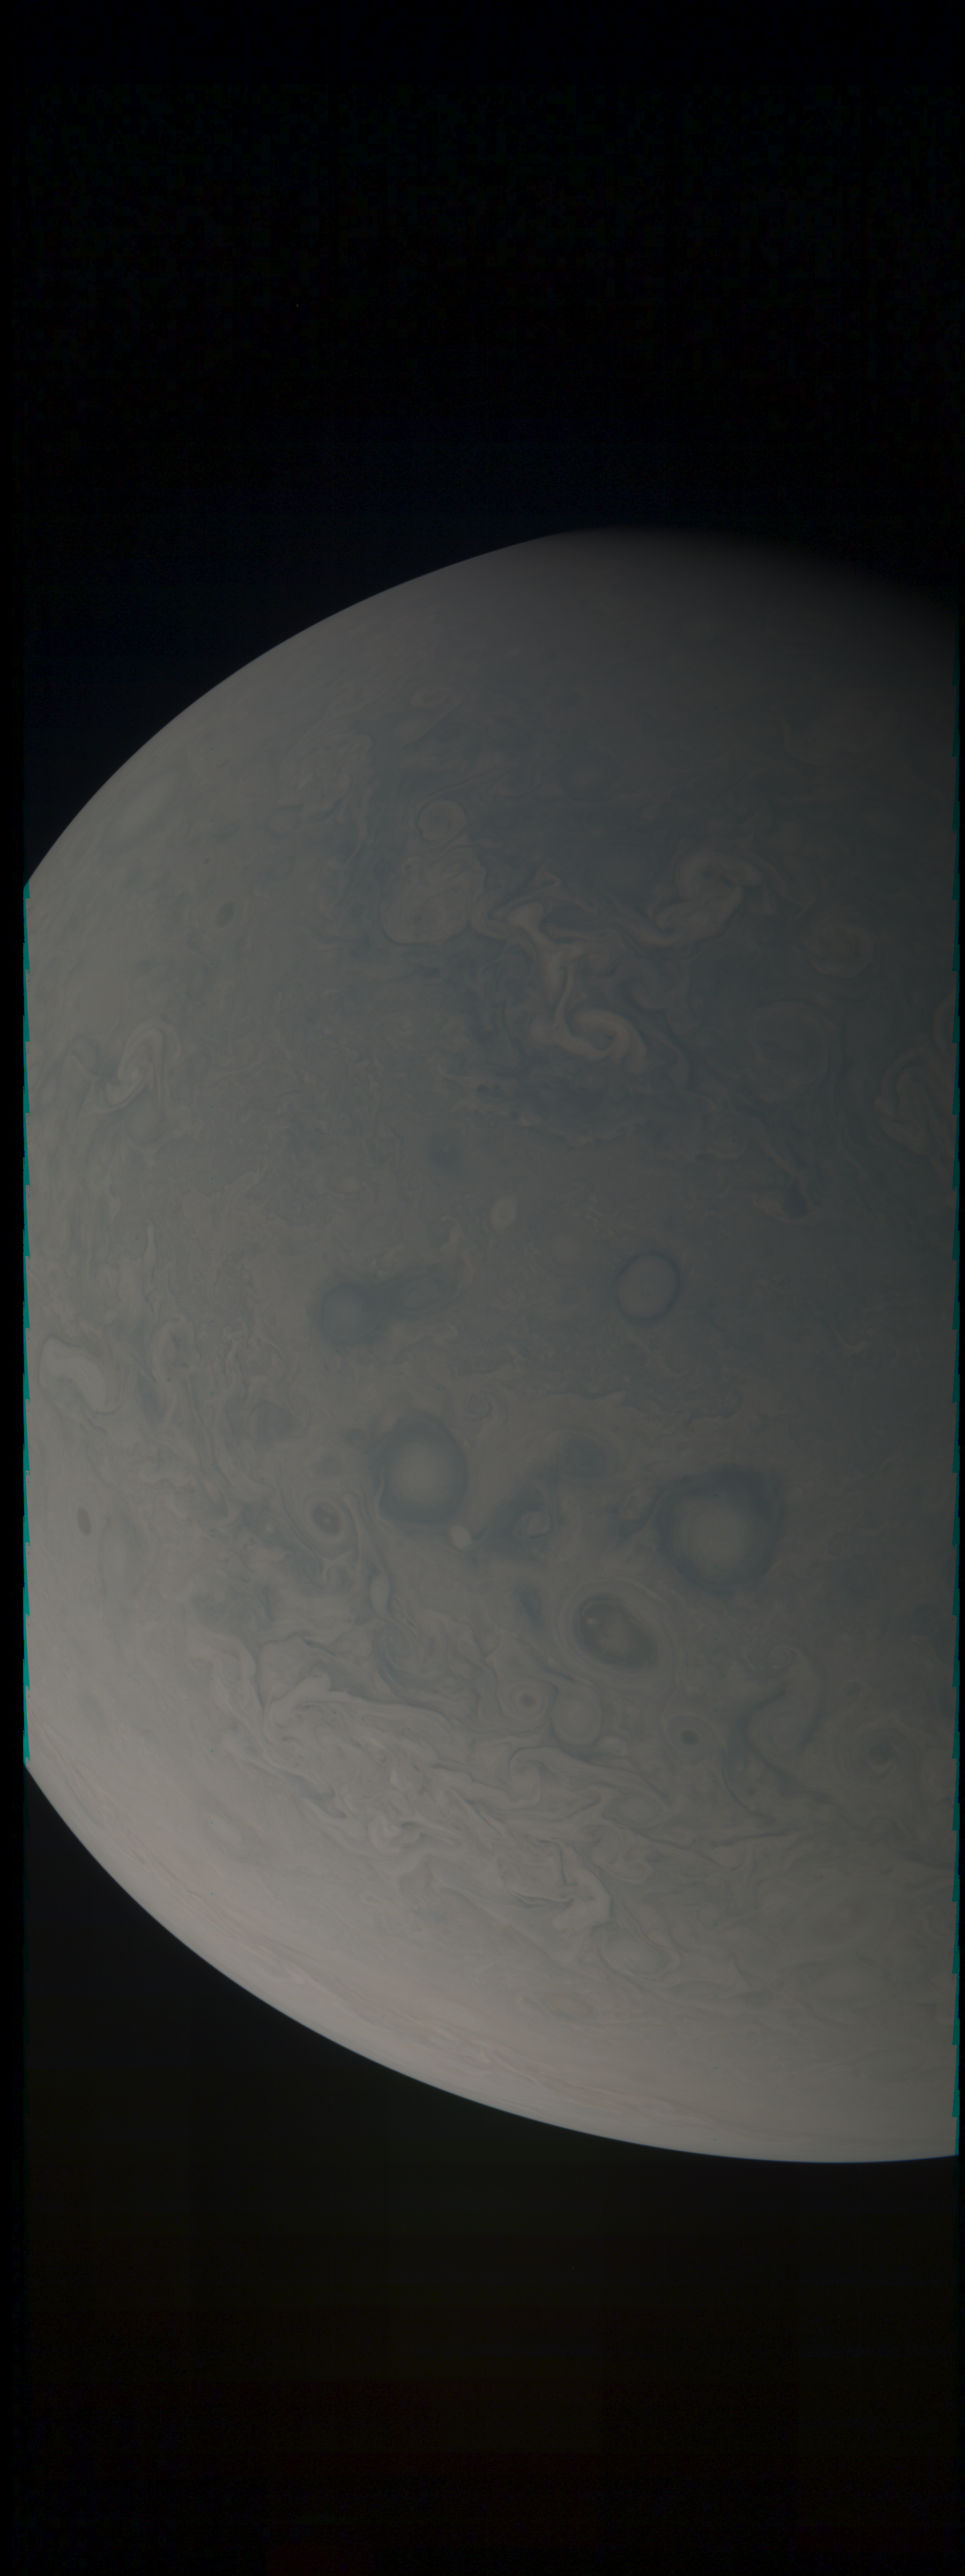 JNCE_2019149_20C00024_V01-raw_proc_hollow_sphere_c_pj_out.BMP_thumbnail_.png